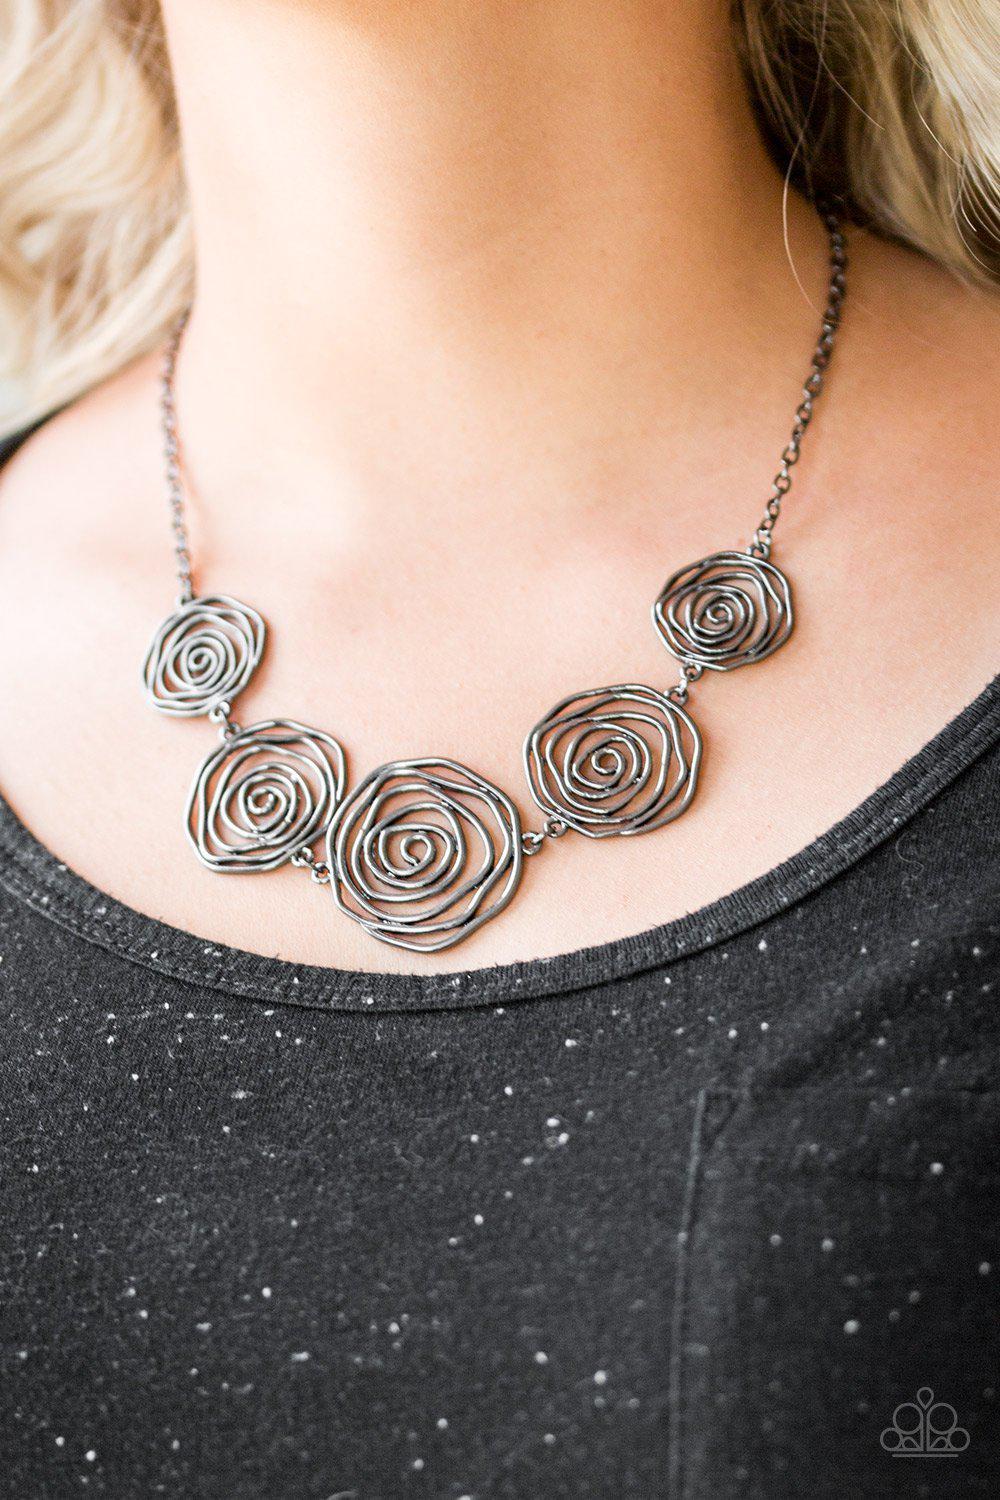 Rosy Rosette Black Gunmetal Necklace and matching Earrings - Paparazzi Accessories-CarasShop.com - $5 Jewelry by Cara Jewels